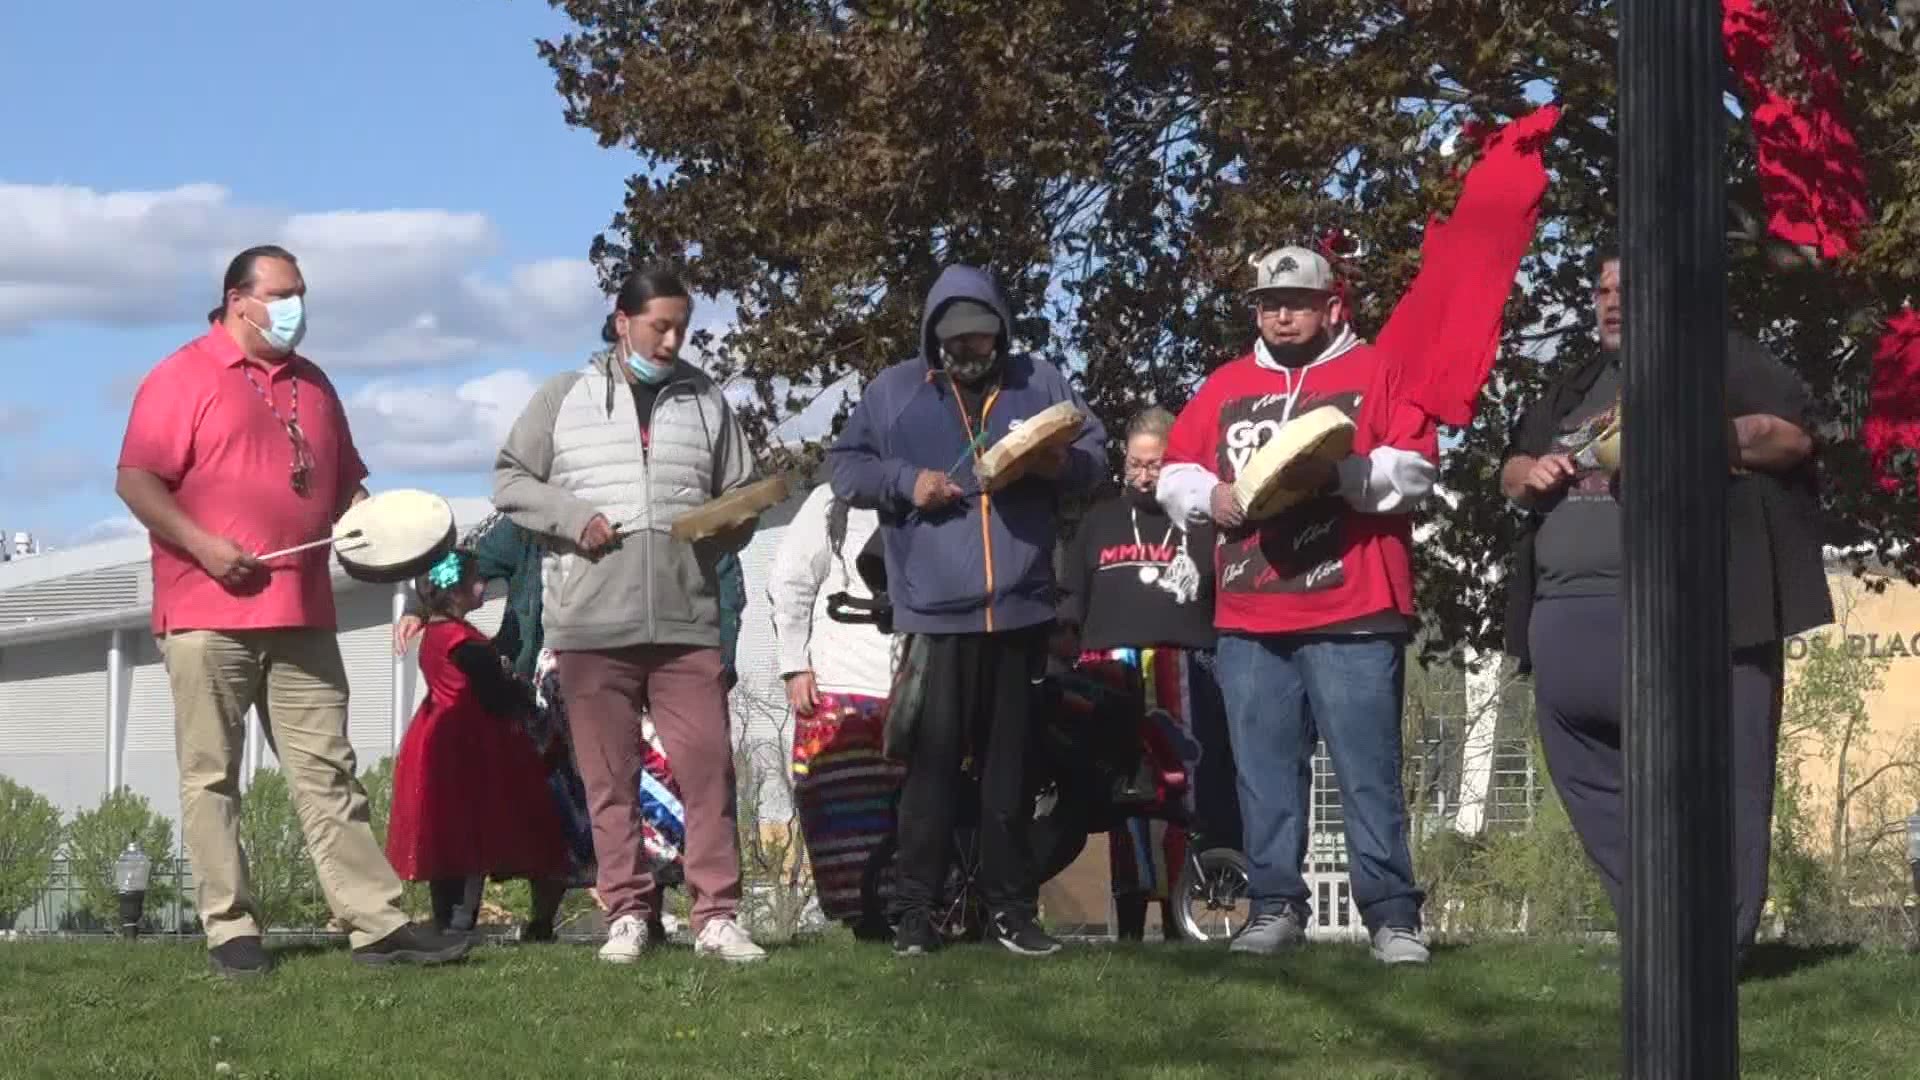 Dozens of people turned out in Ah-Nab-Awen Park Wednesday before a march through downtown Grand Rapids.